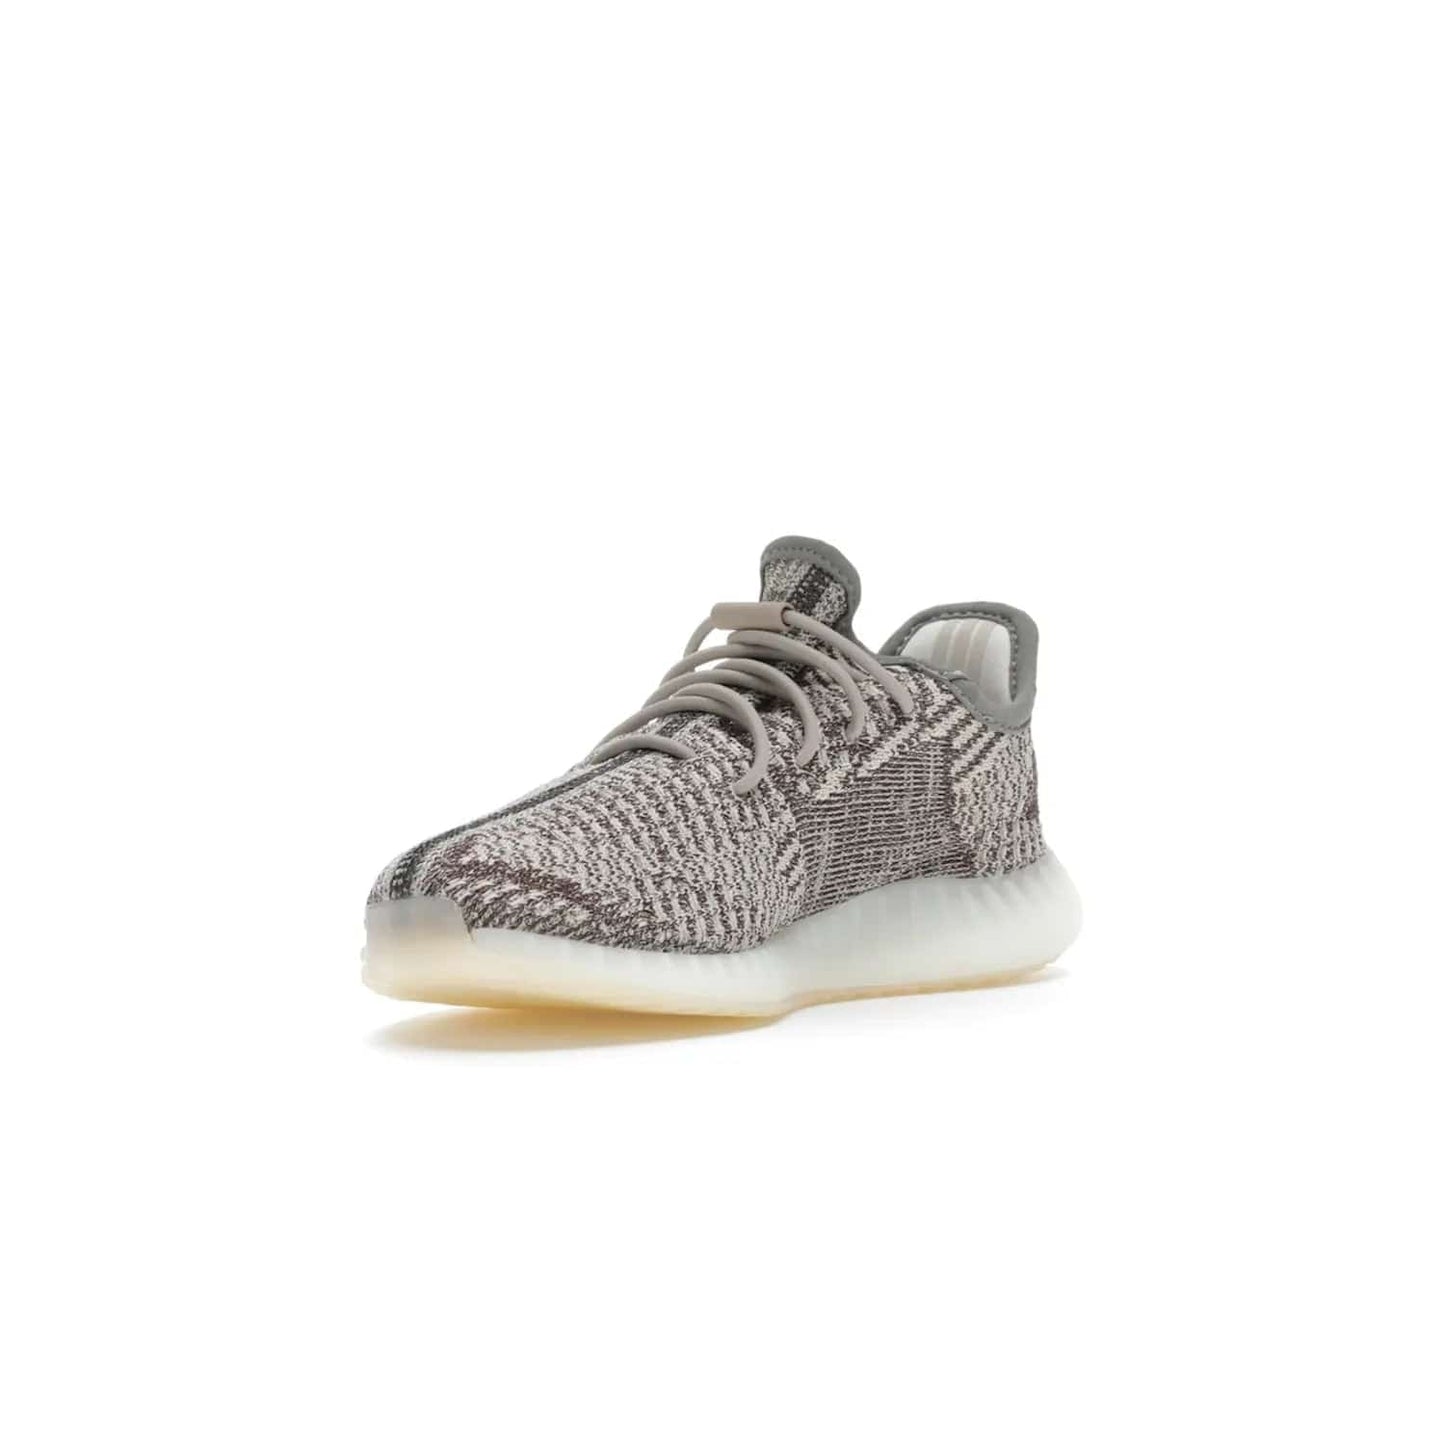 adidas Yeezy Boost 350 V2 Zyon (Kids) - Image 14 - Only at www.BallersClubKickz.com - The adidas Yeezy Boost 350 V2 Zyon (Kids) - perfect pick for fashion-savvy kids. Features soft Primeknit upper, lace closure & colorful patterning. Comfort & style for kids' summer outfits!